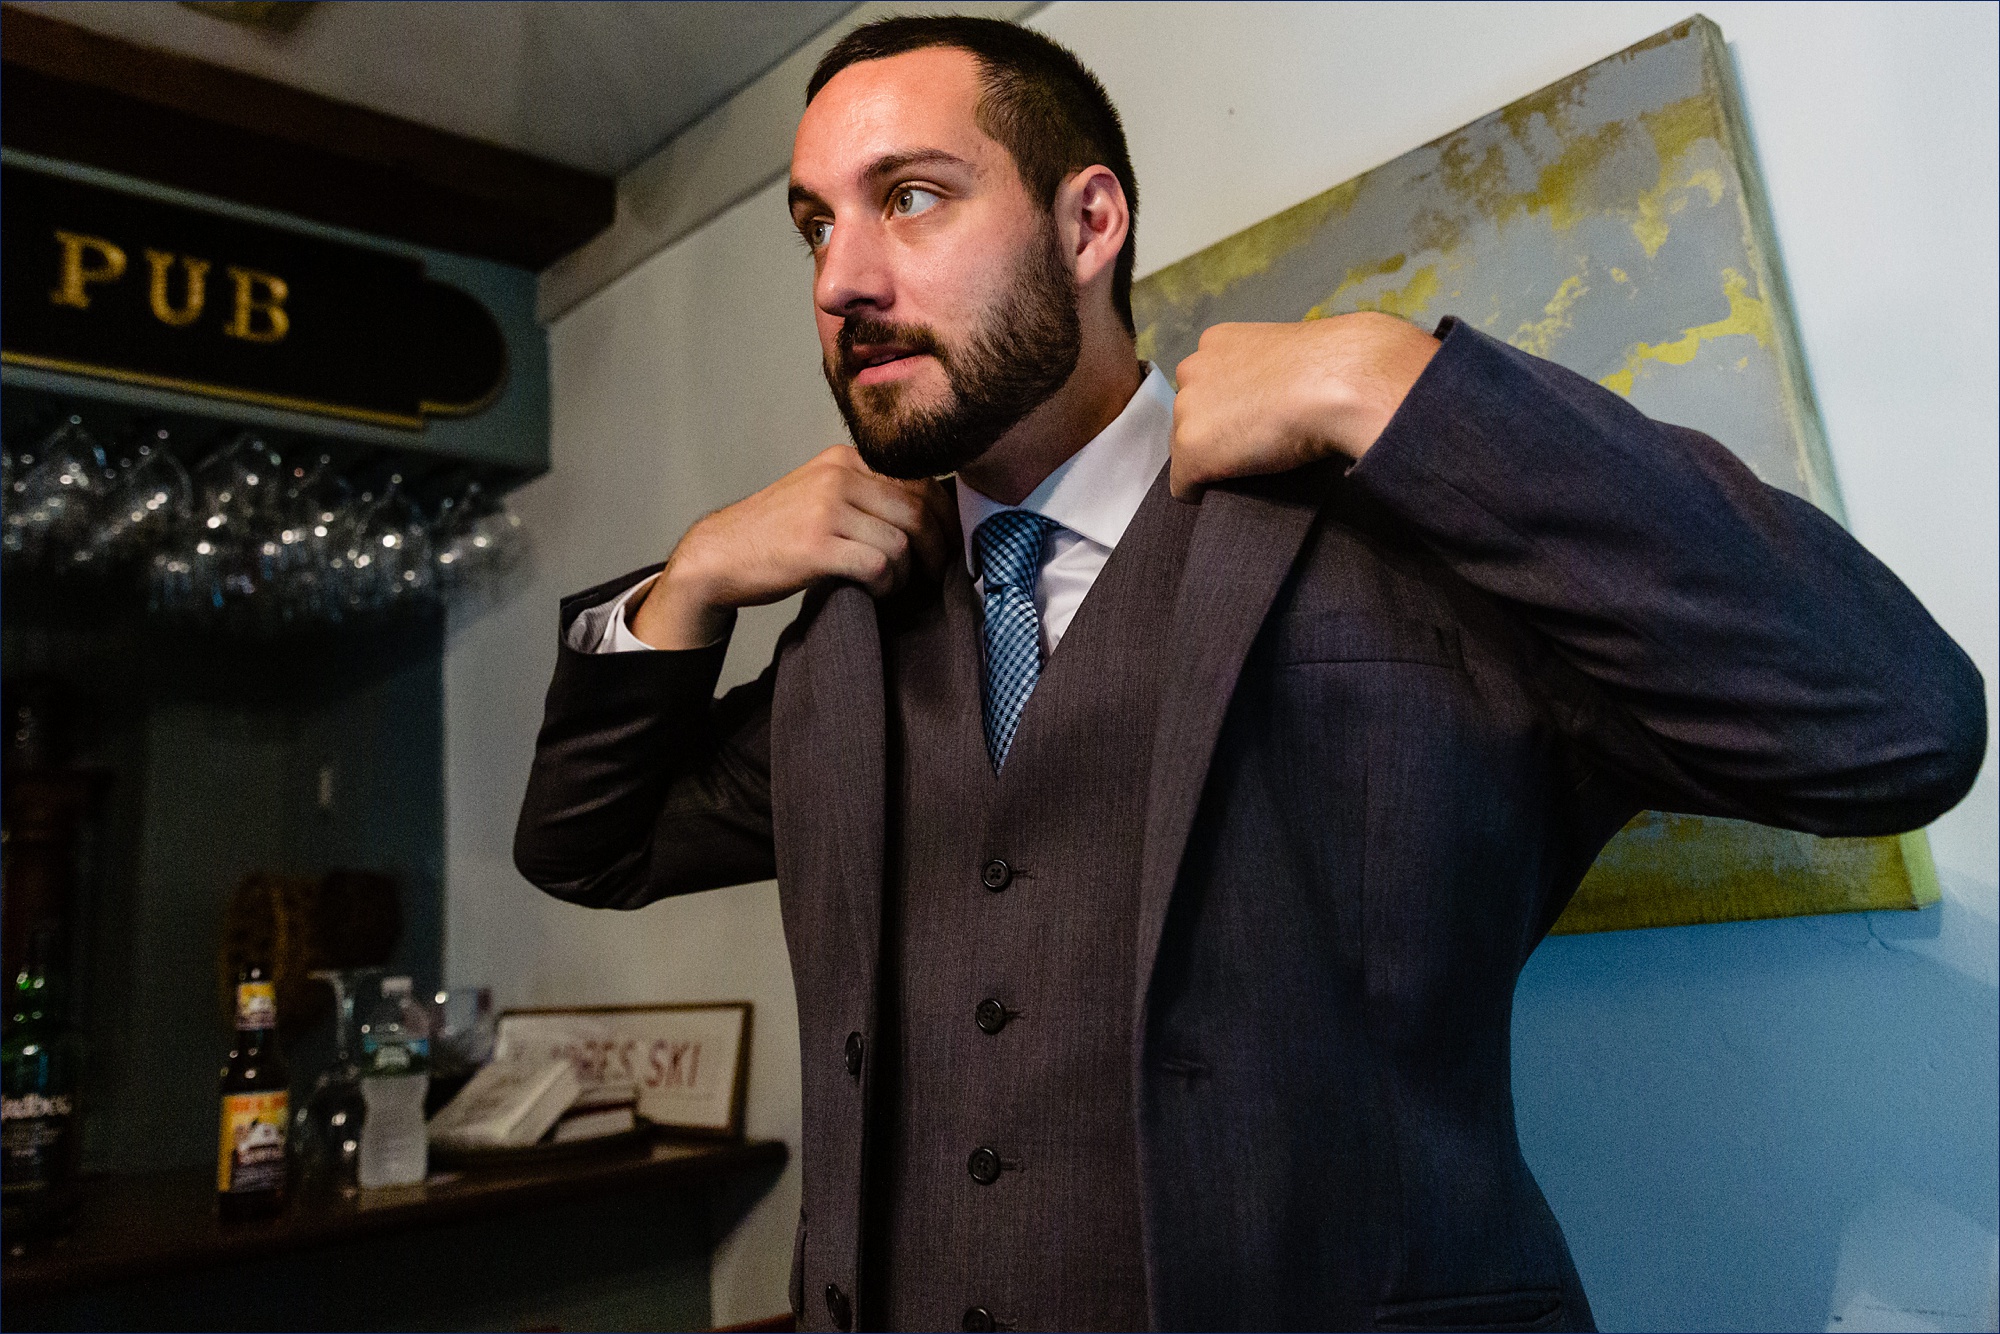 The groom gets ready for the wedding day by putting on his suit while hanging out in the pub